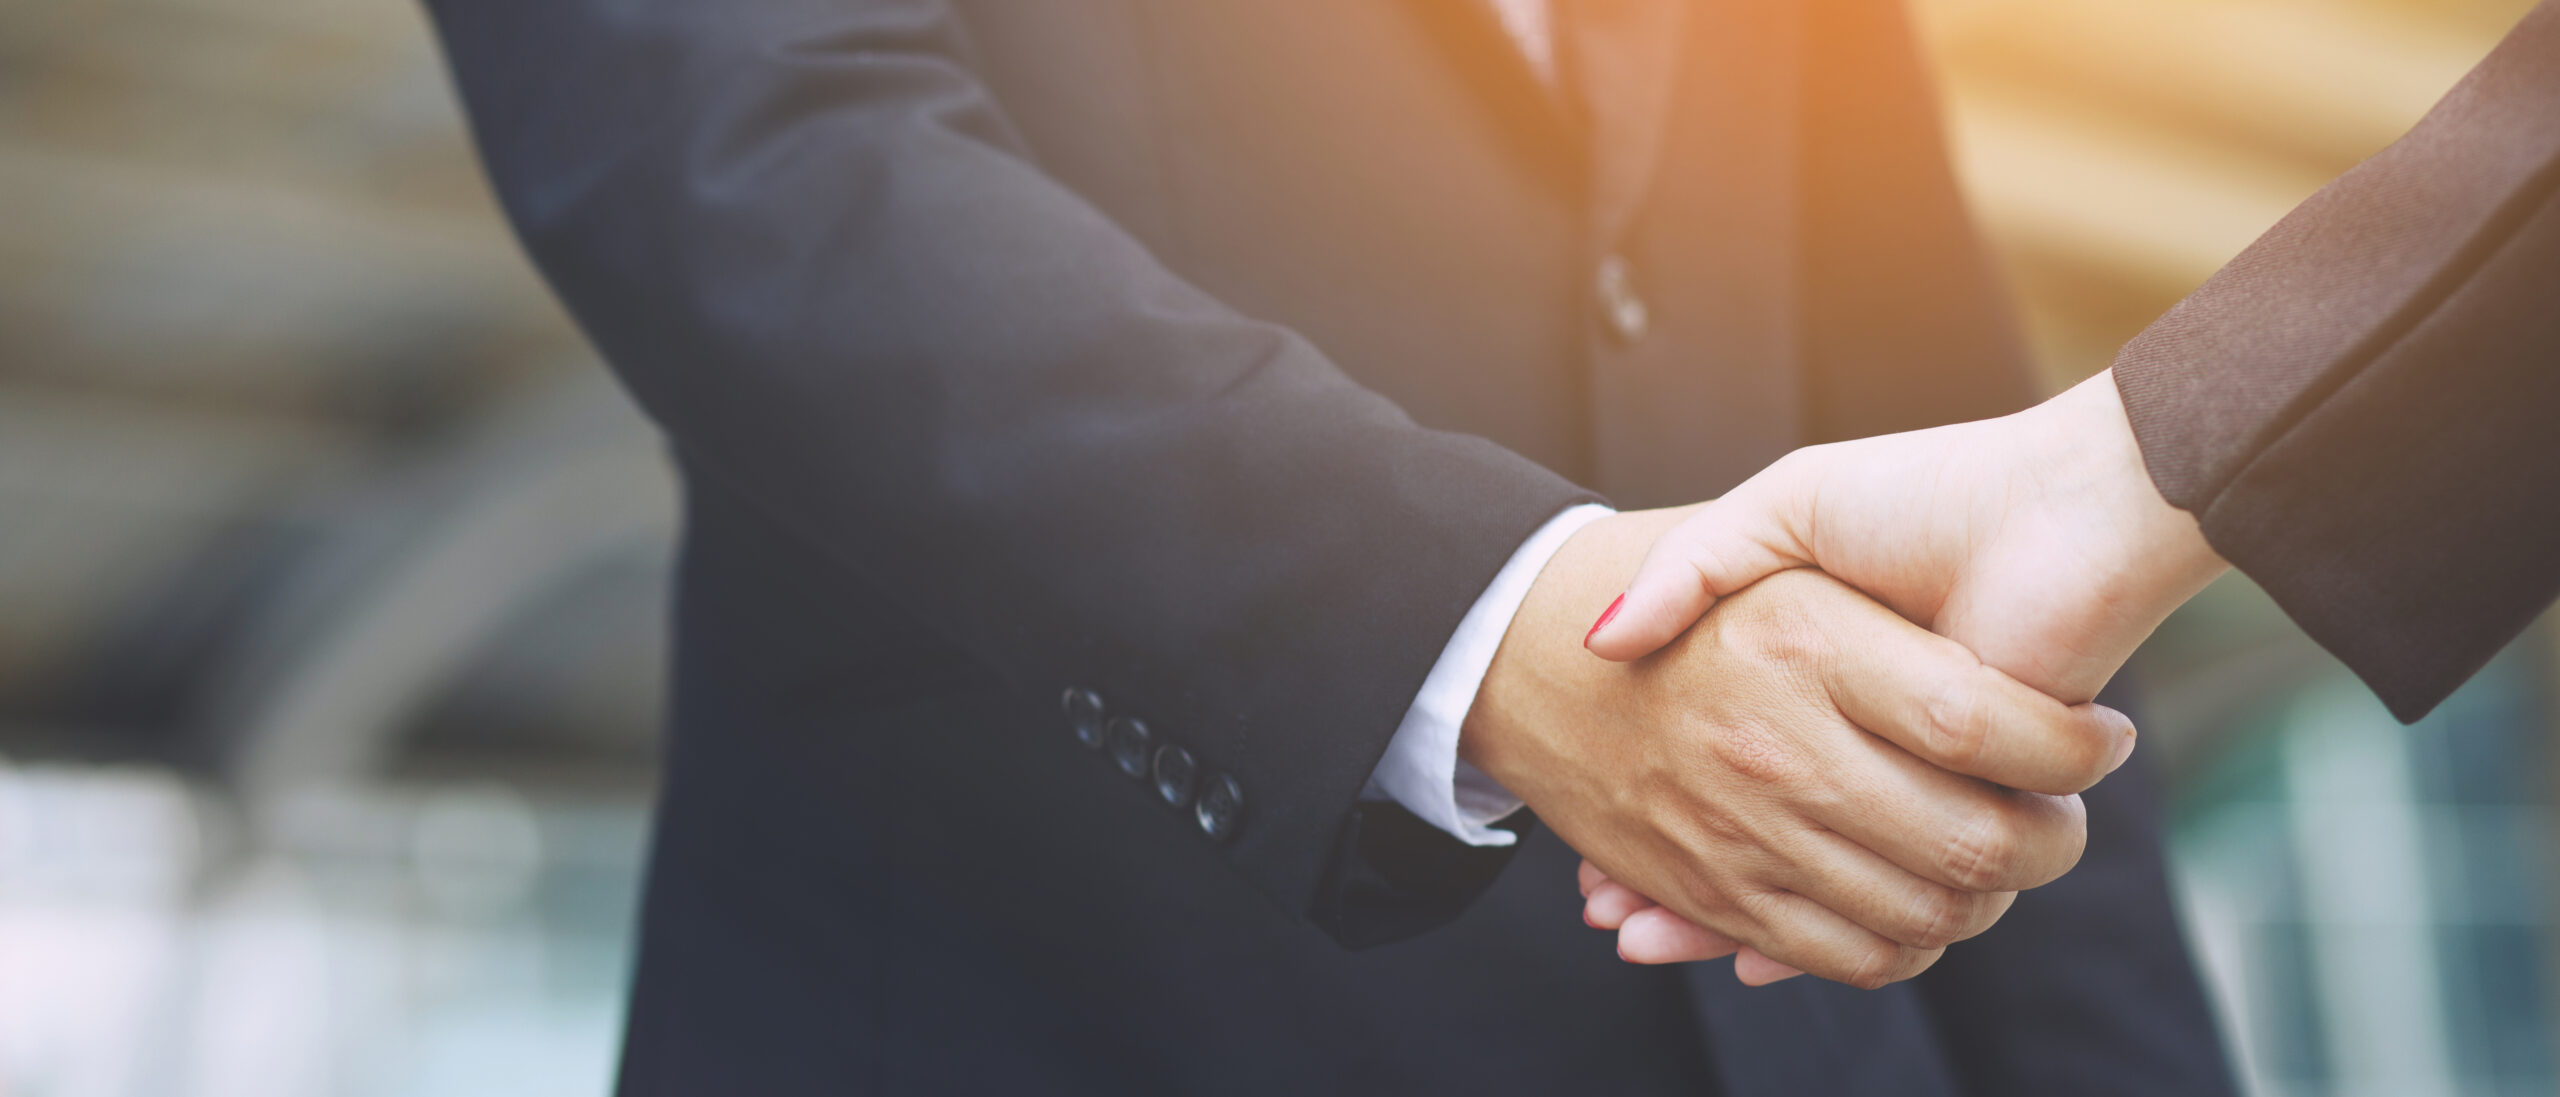 Closeup of a hand shake between two colleagues